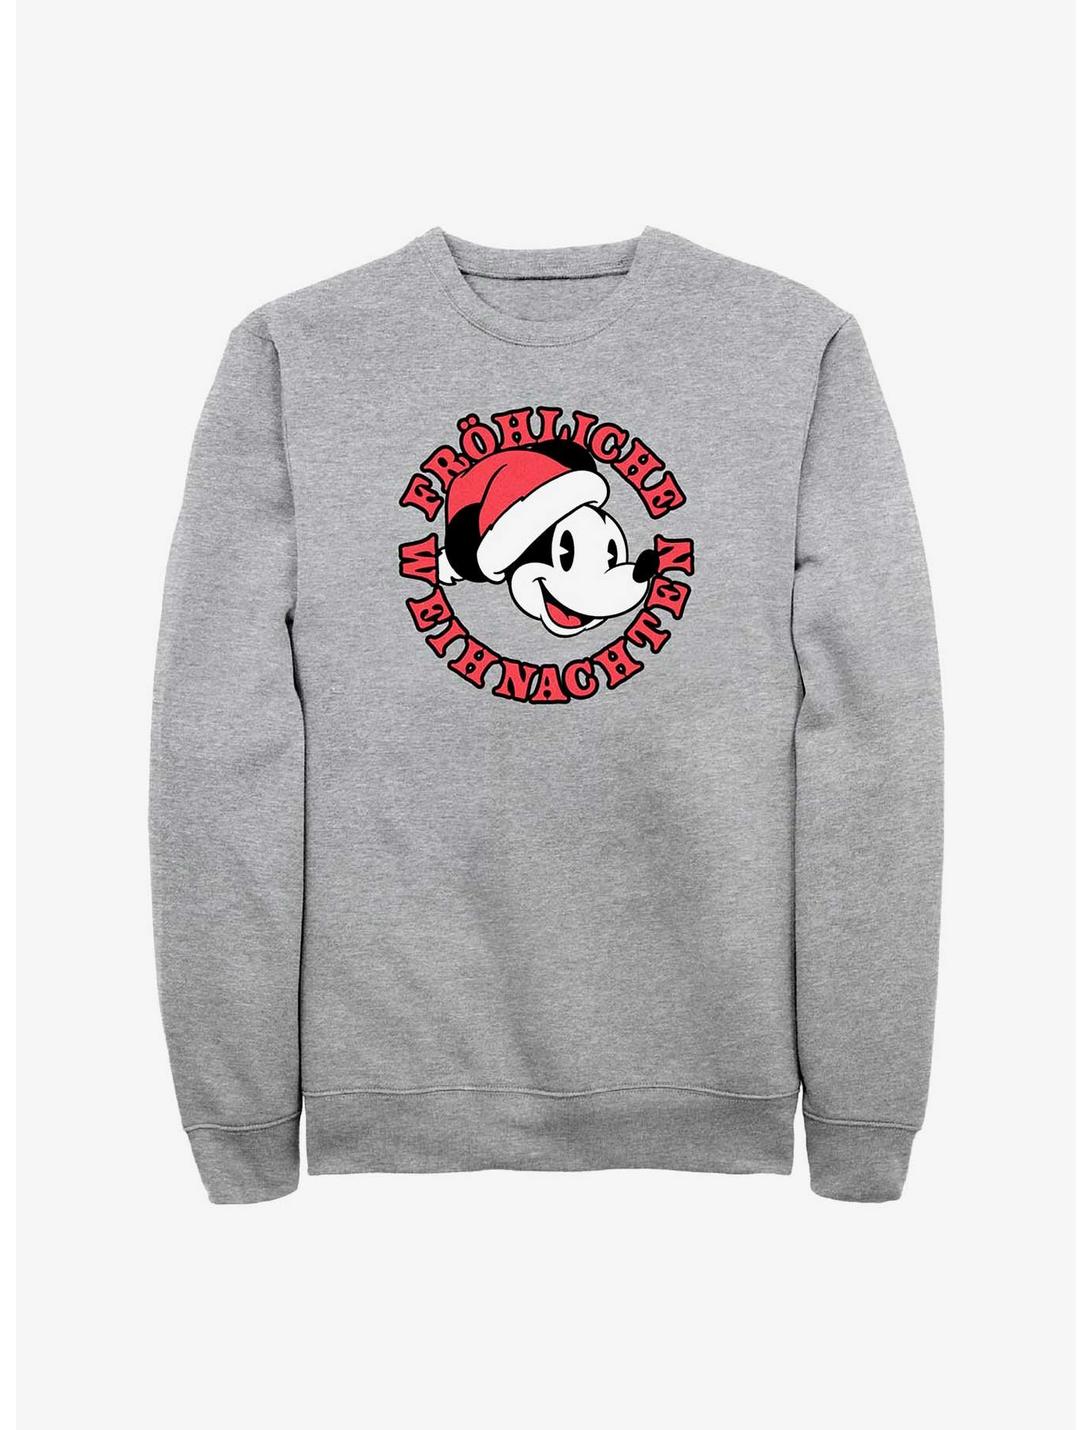 Disney Mickey Mouse Frohliche Weihnachten Merry Christmas in German Sweatshirt, ATH HTR, hi-res